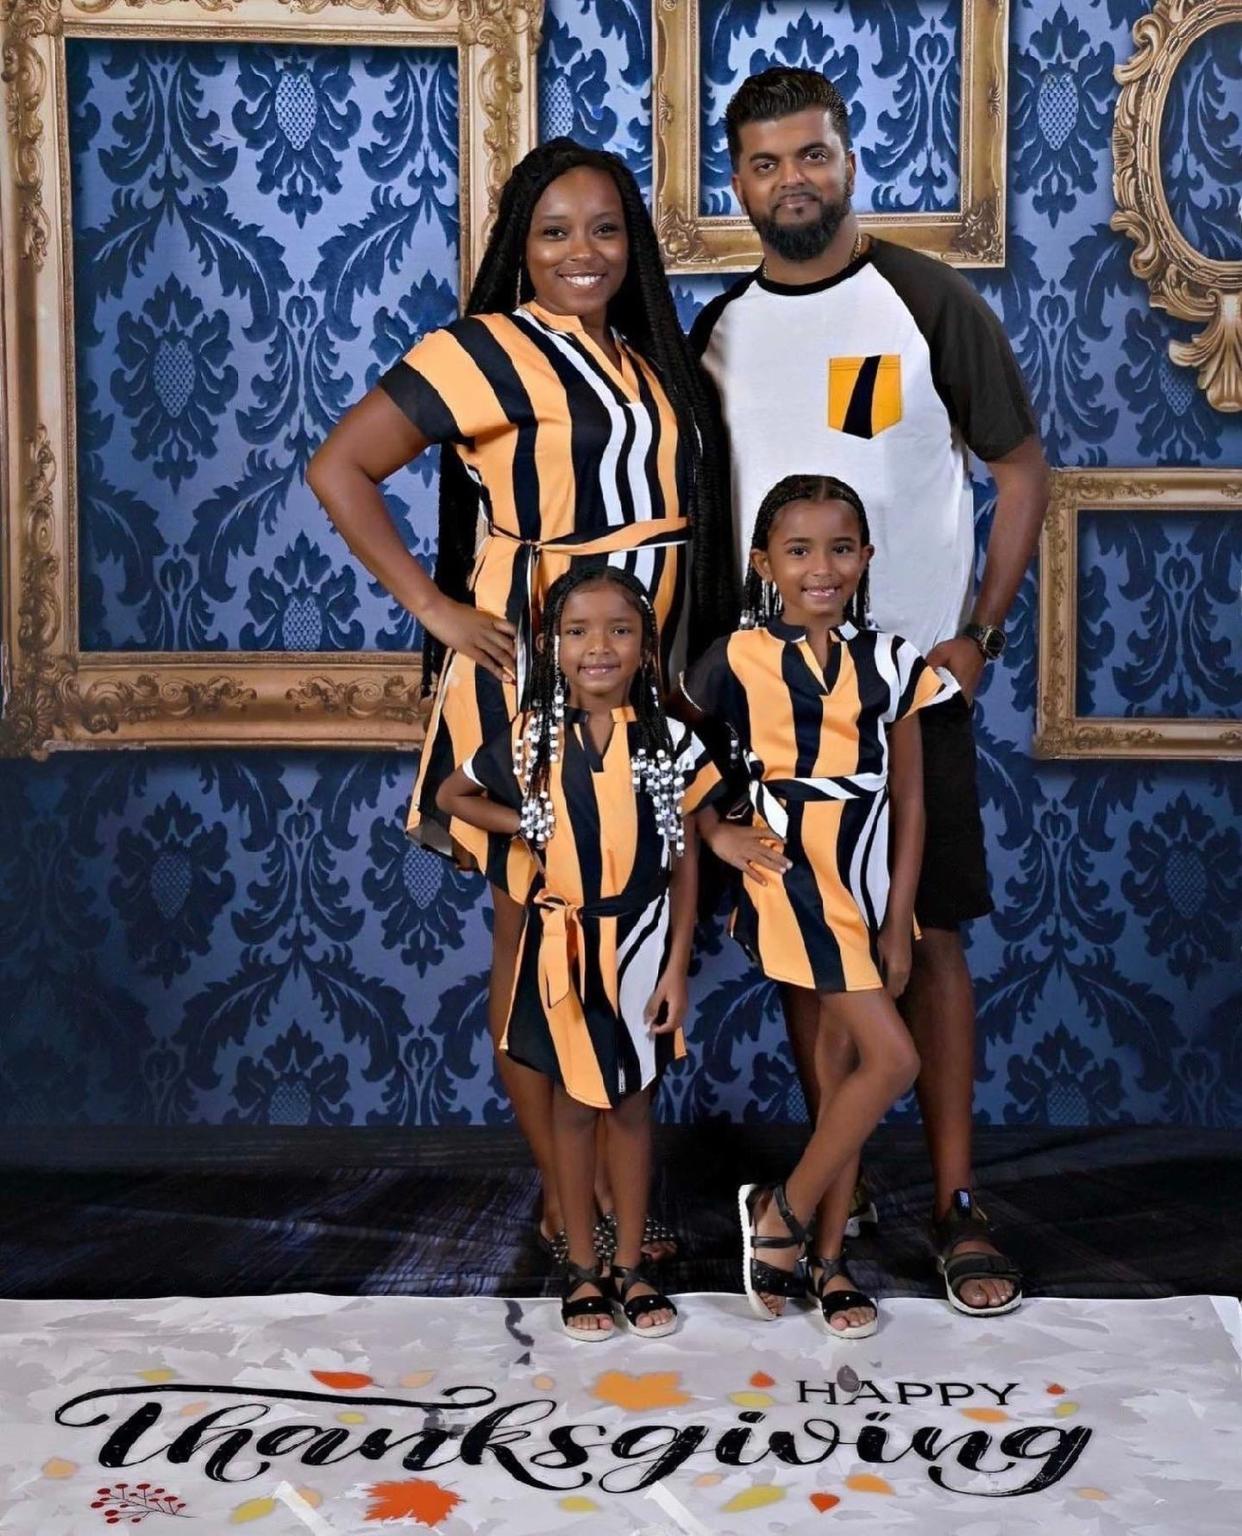 Jasmine and Richard Ramnarine with their daughters, Royce and Reign.